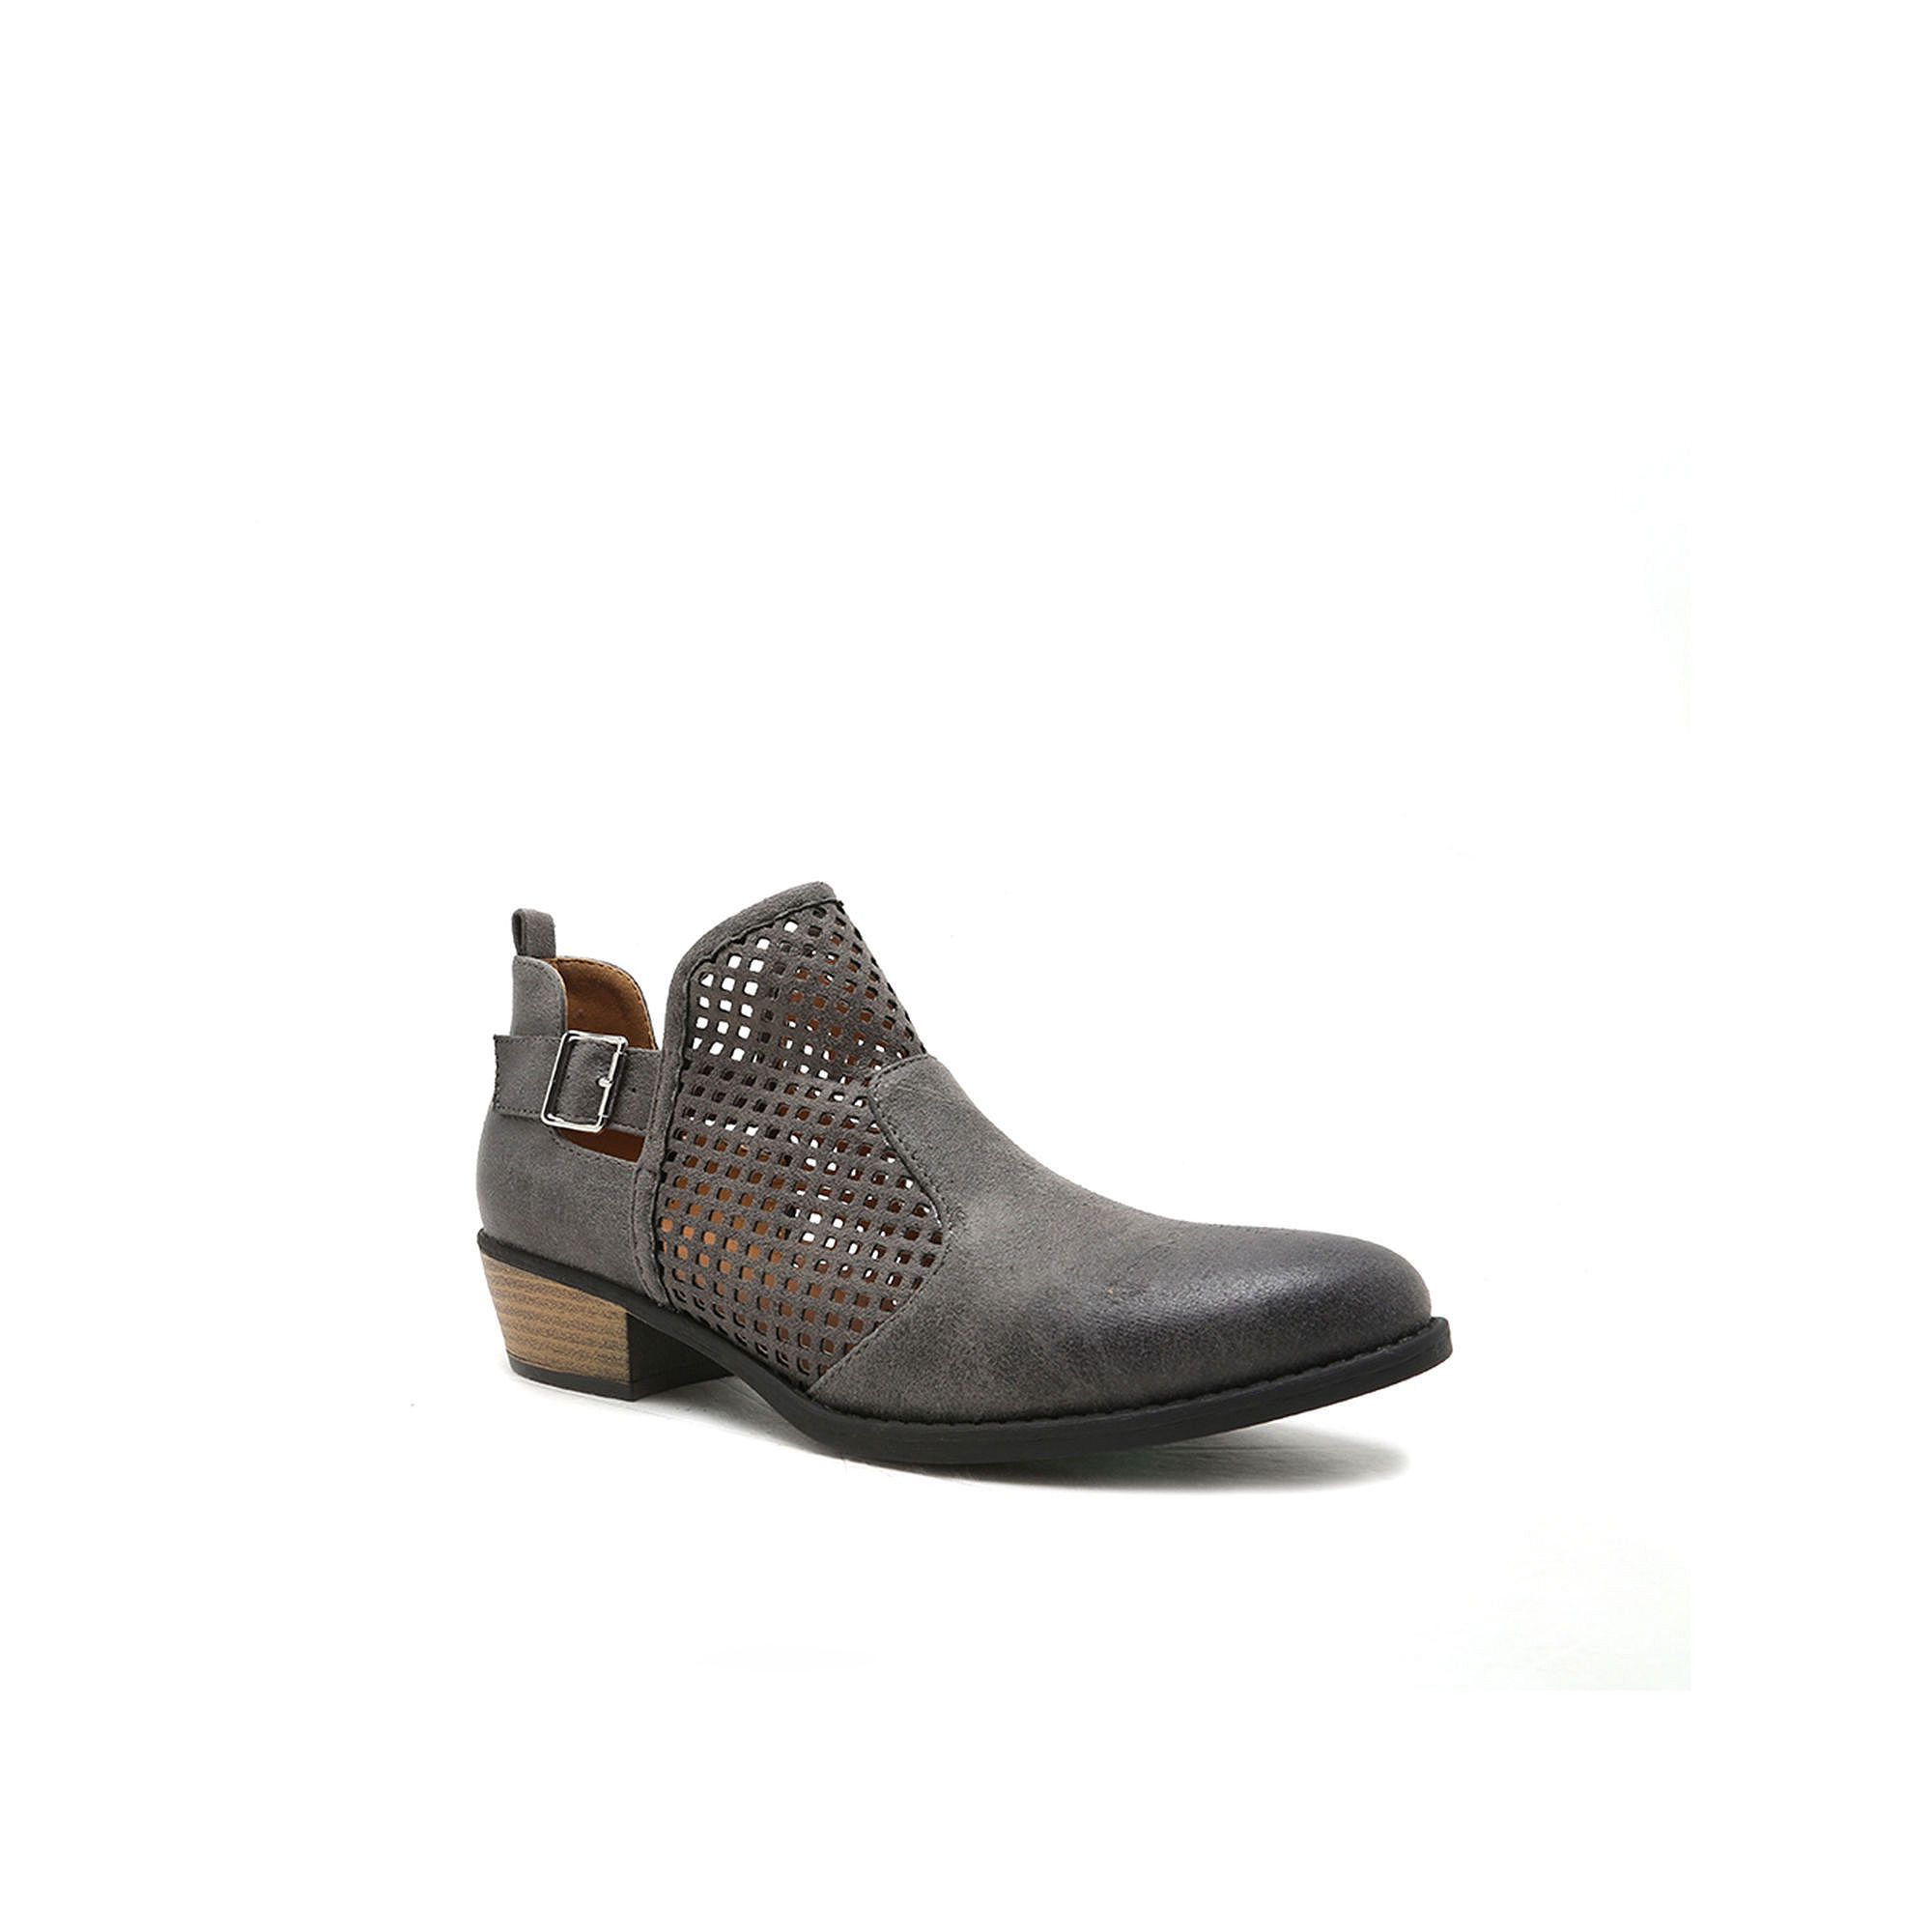 Qupid Sochi Perforated Booties | JCPenney